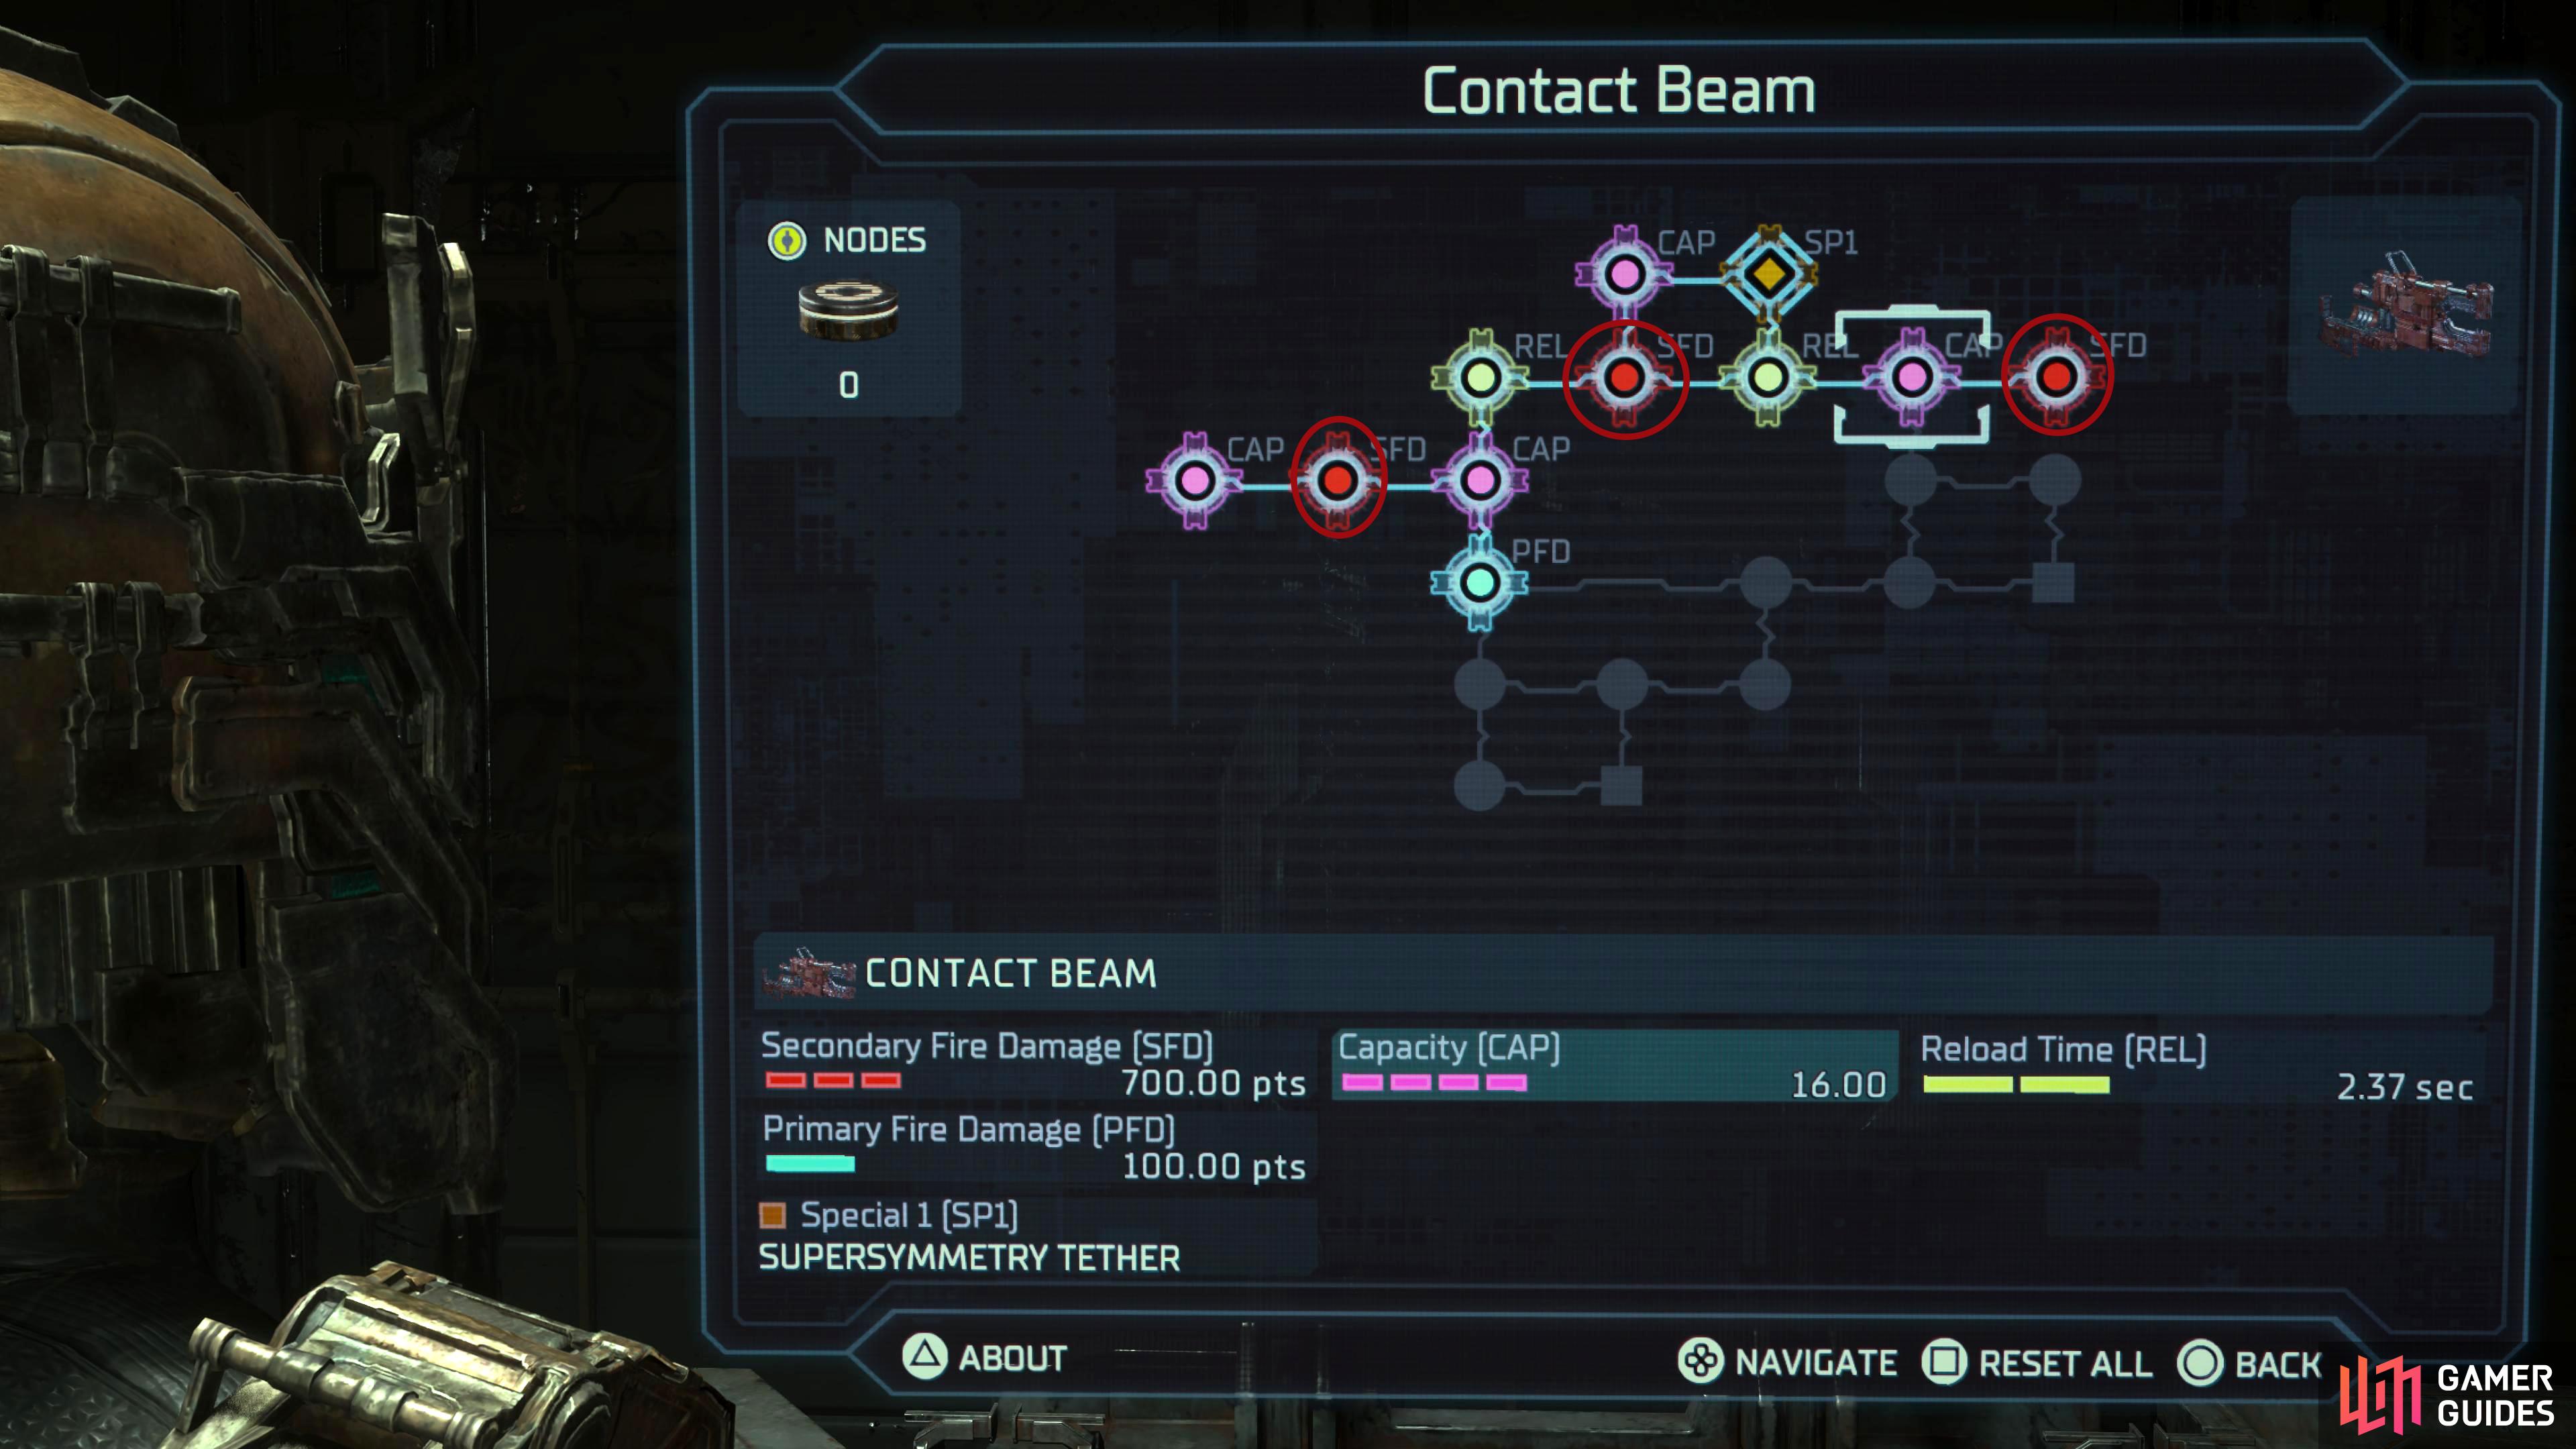 Prioritize Secondary Fire Damage when upgrading the Contact Beam.